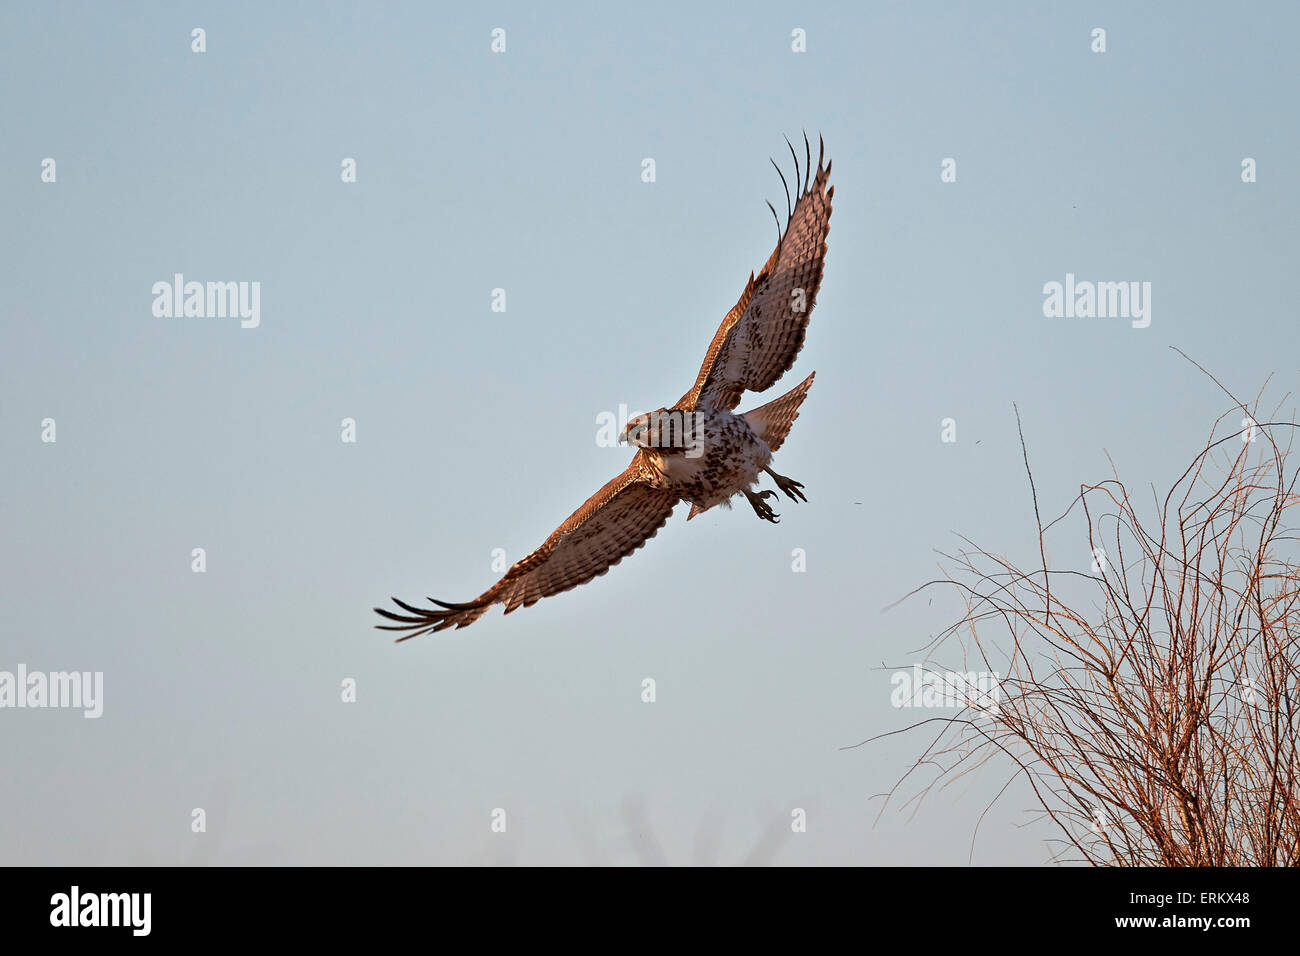 Juvenile red-tailed hawk (Buteo jamaicensis) in flight, Bosque del Apache National Wildlife Refuge, New Mexico, USA Stock Photo